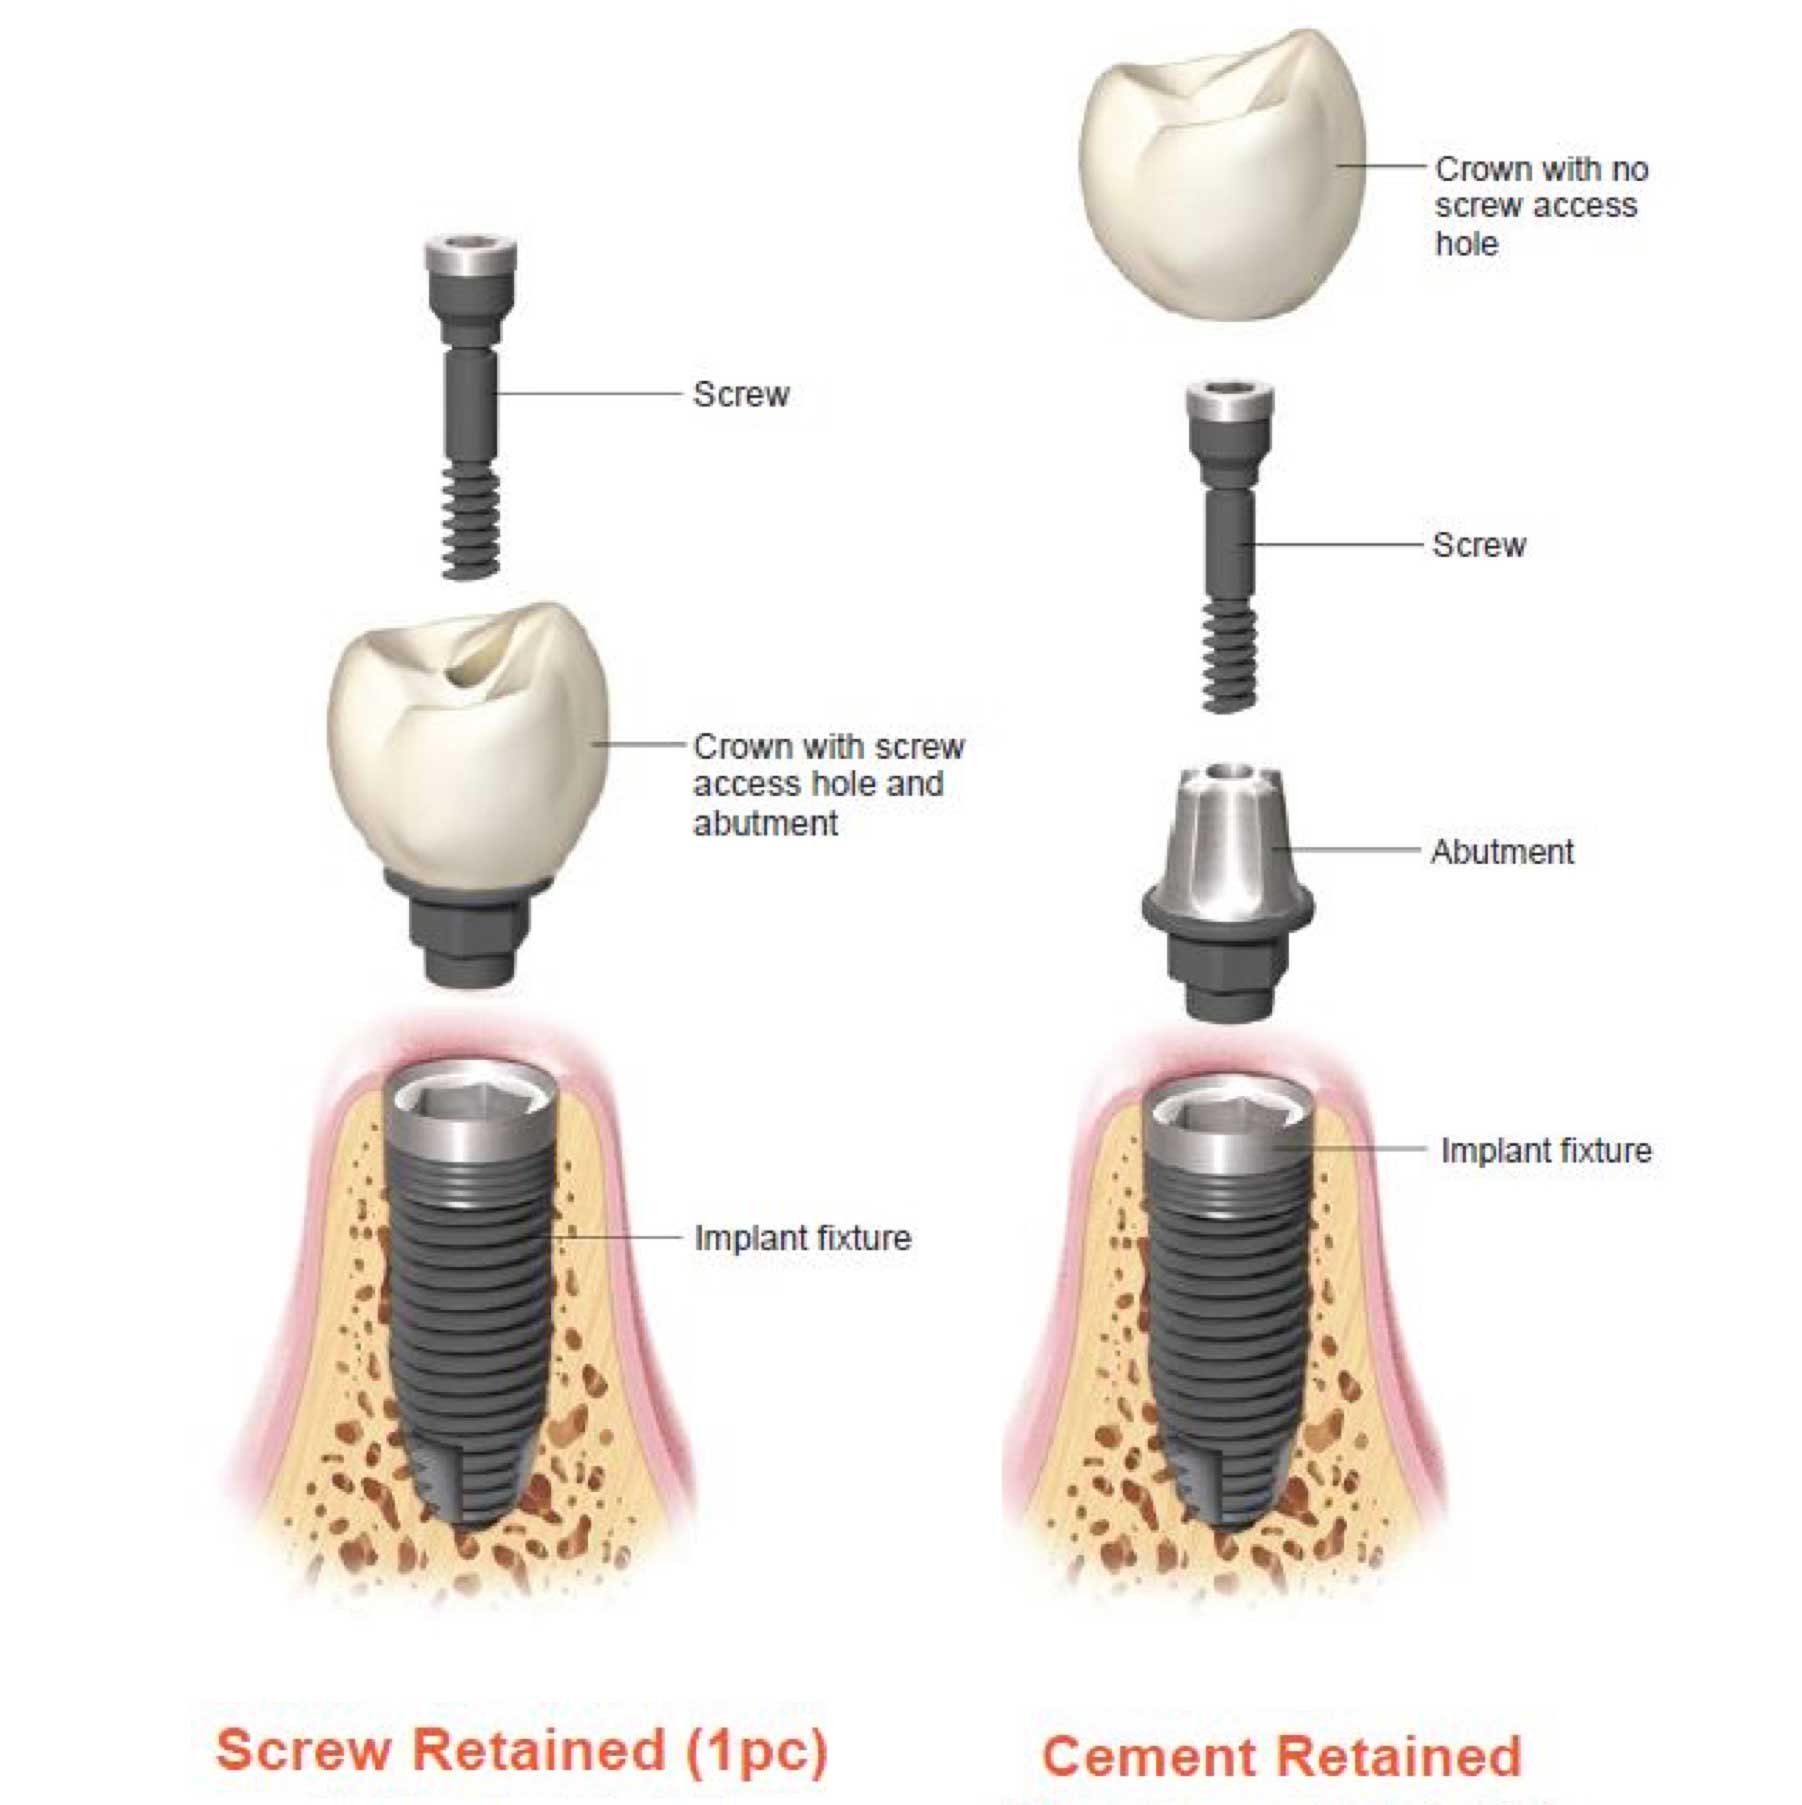 Dental Implants West Hollywood and Beverly Hills